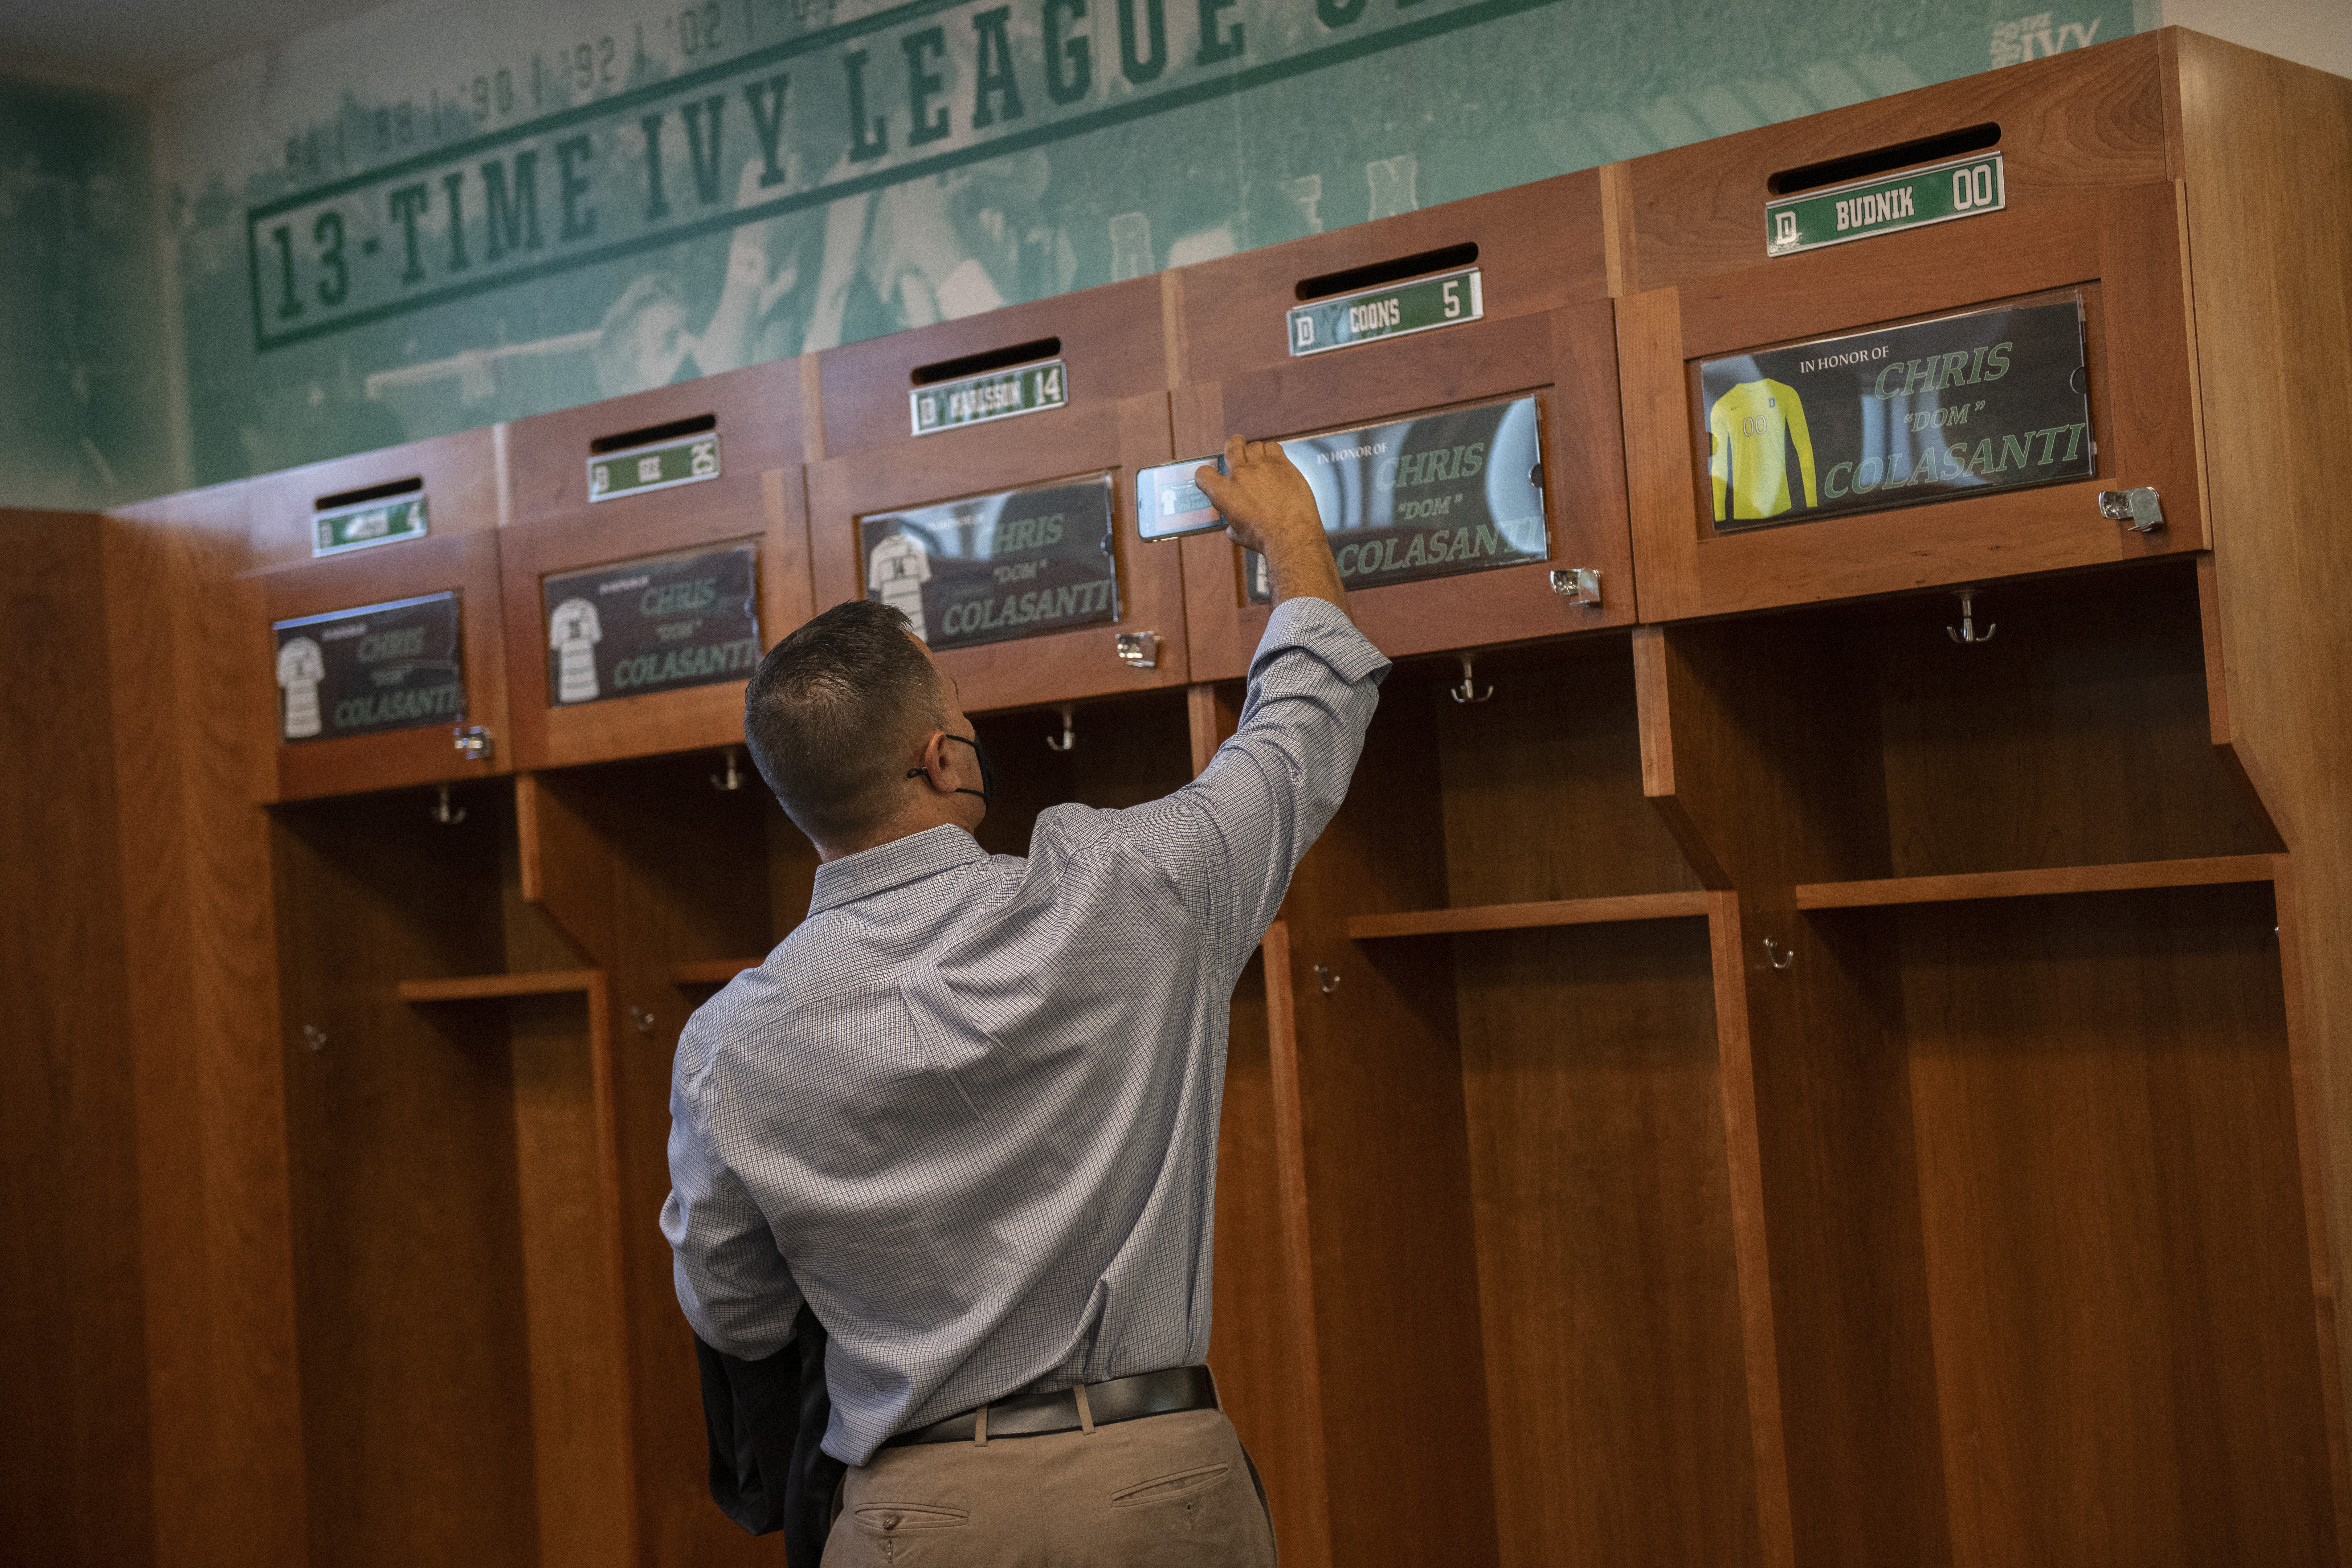 A man takes a picture of the men's soccer locker room with name plates honoring Chris "Dom" Colasanti